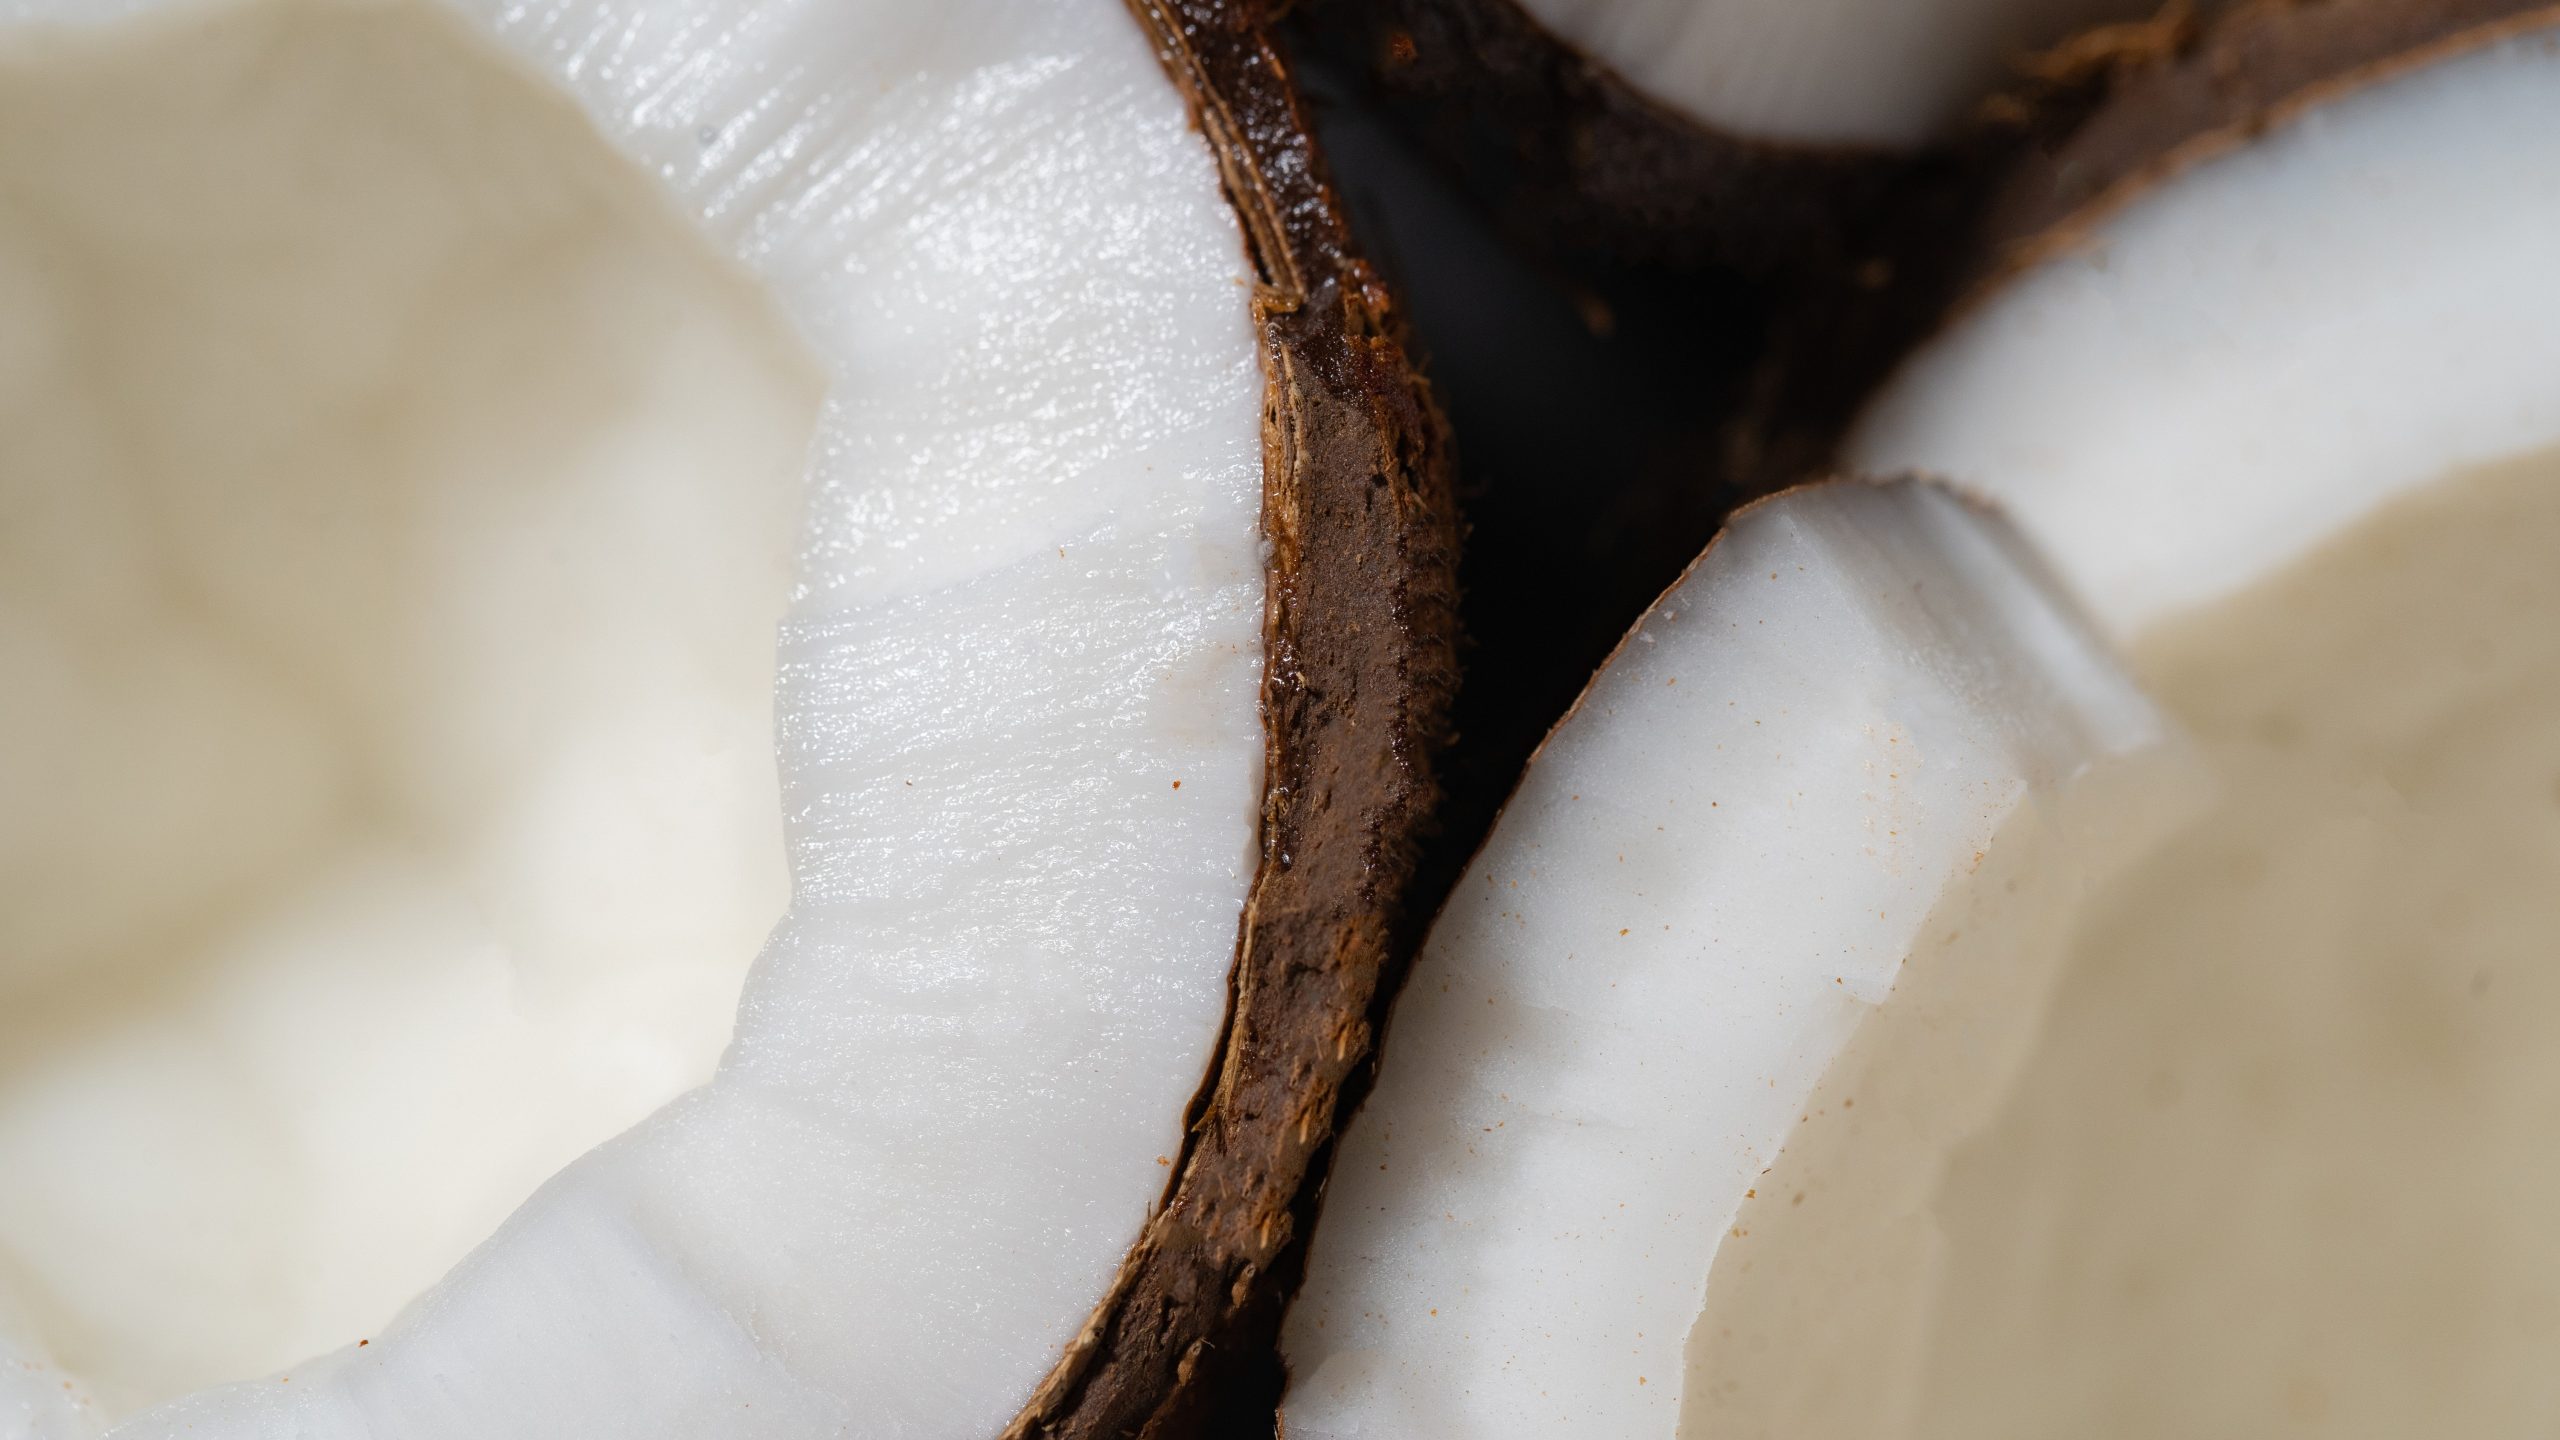 Close-up of a cracked coconut, showing the rough brown outer shell and the smooth white inner flesh. the textures and natural contrasts are highlighted.